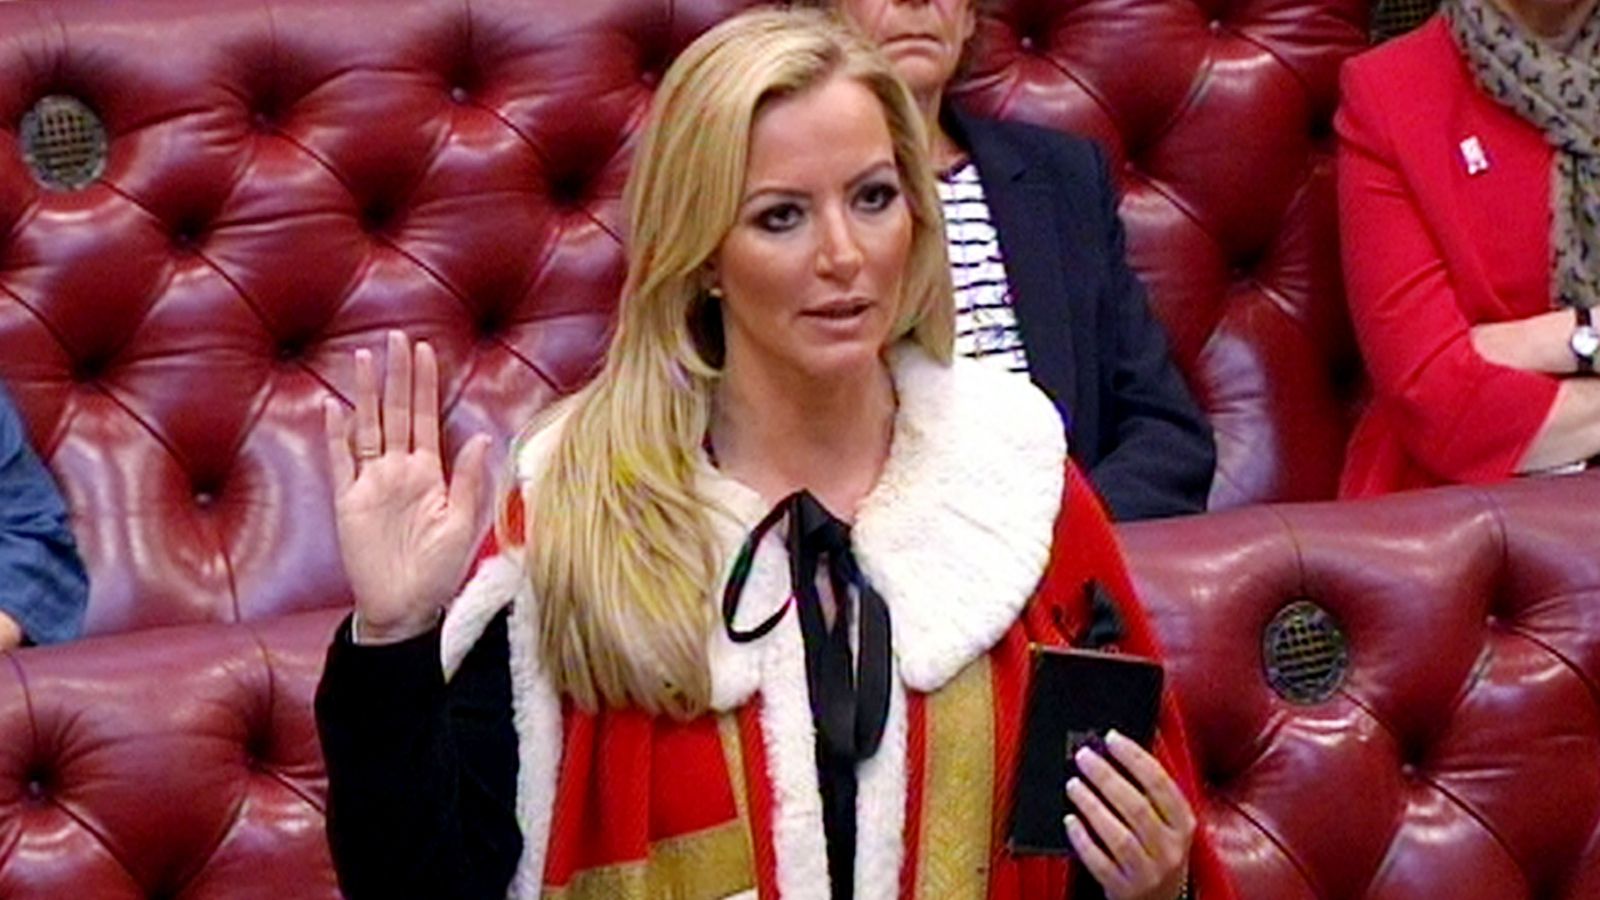 Michelle Mone should not return to House of Lords, says minister after PPE controversy